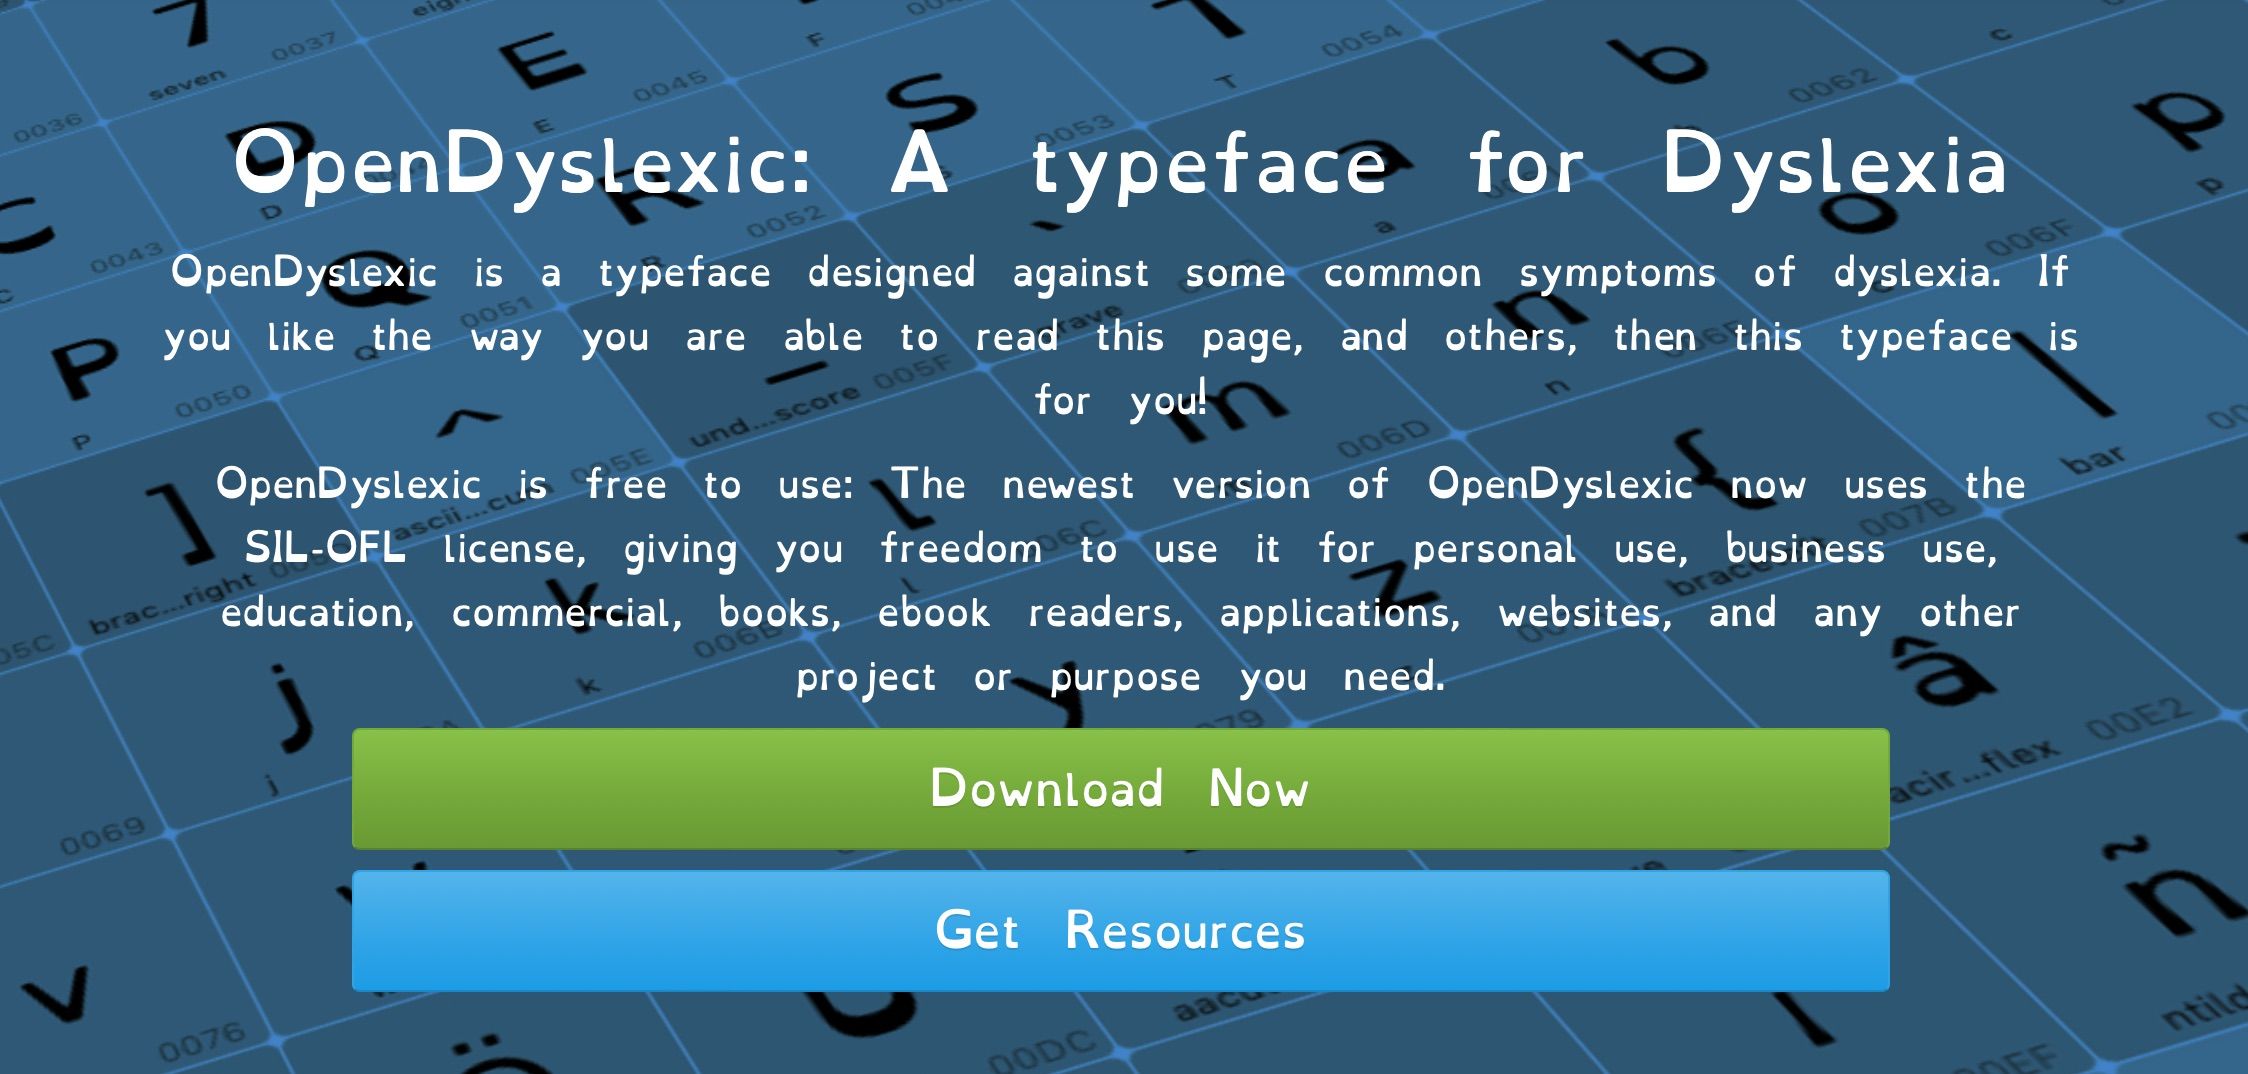 Screenshot showing the OpenDyslexic Typeface